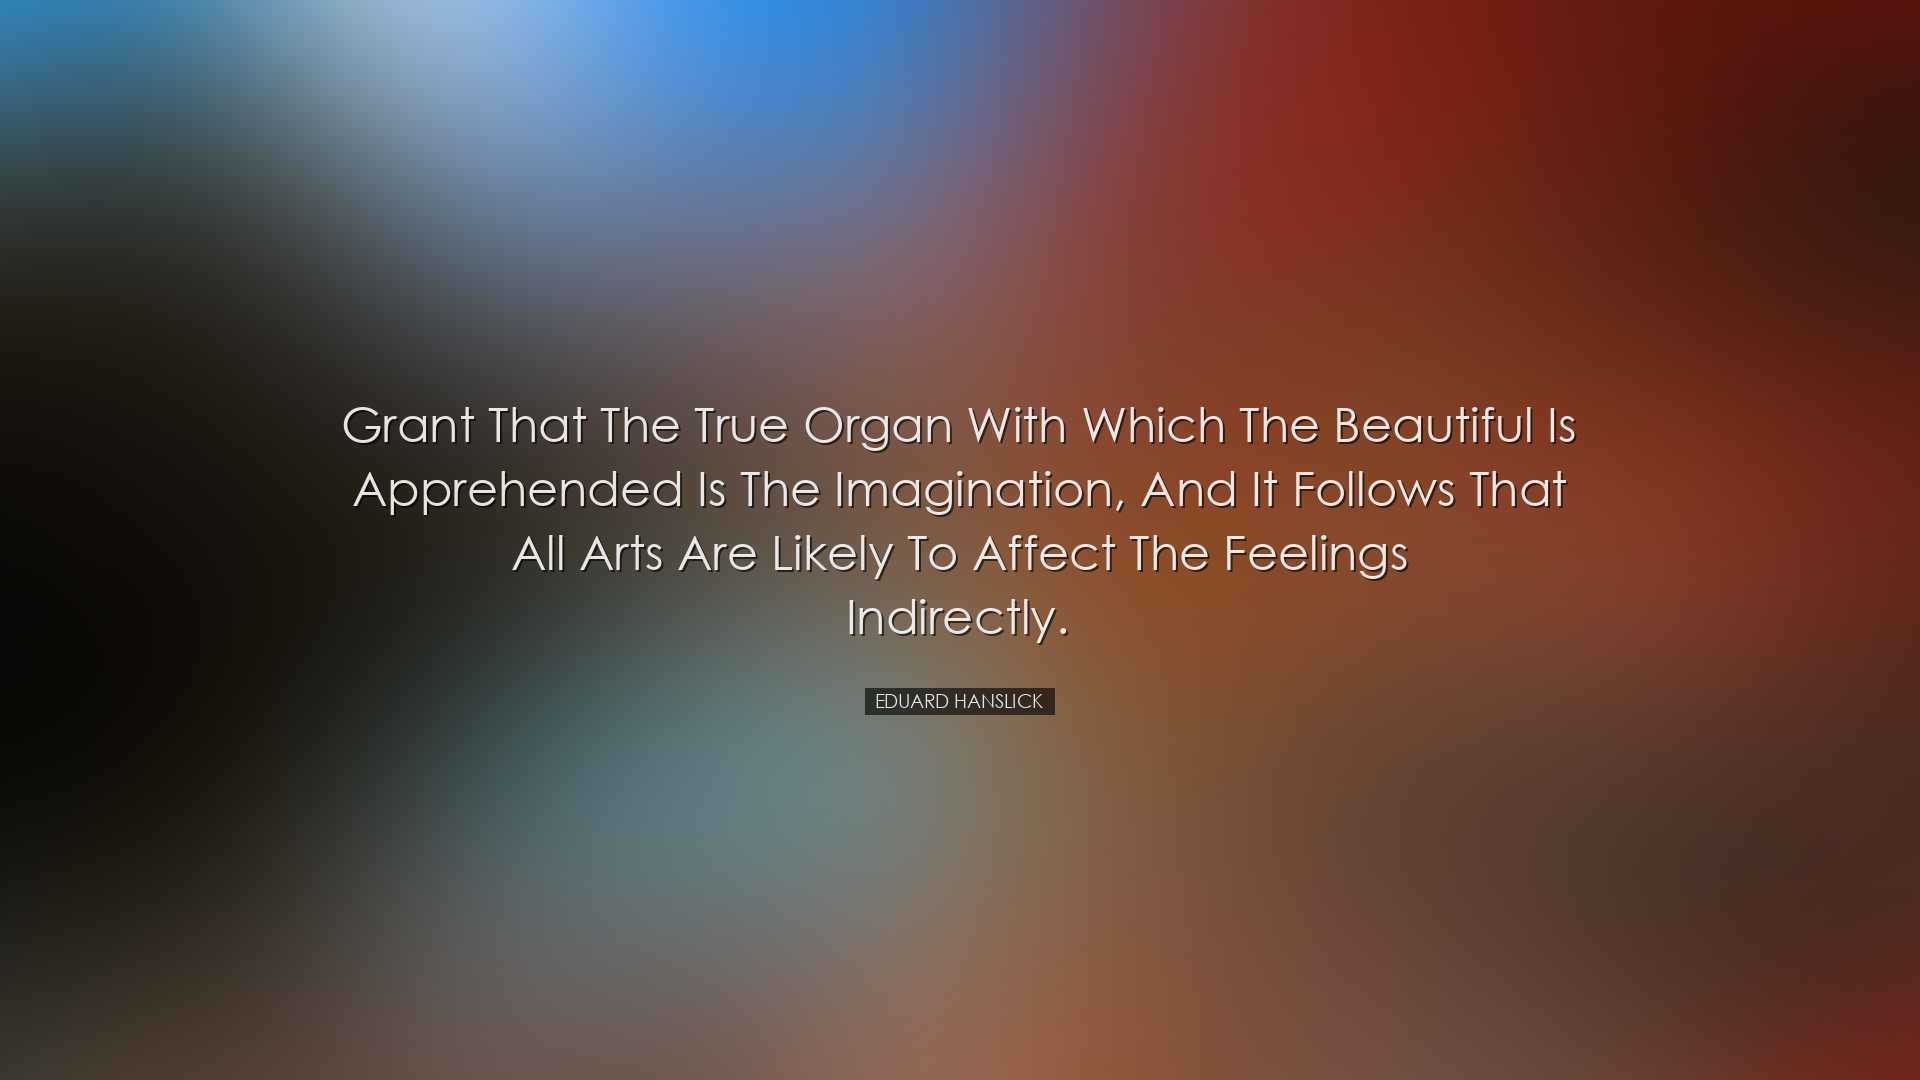 Grant that the true organ with which the beautiful is apprehended